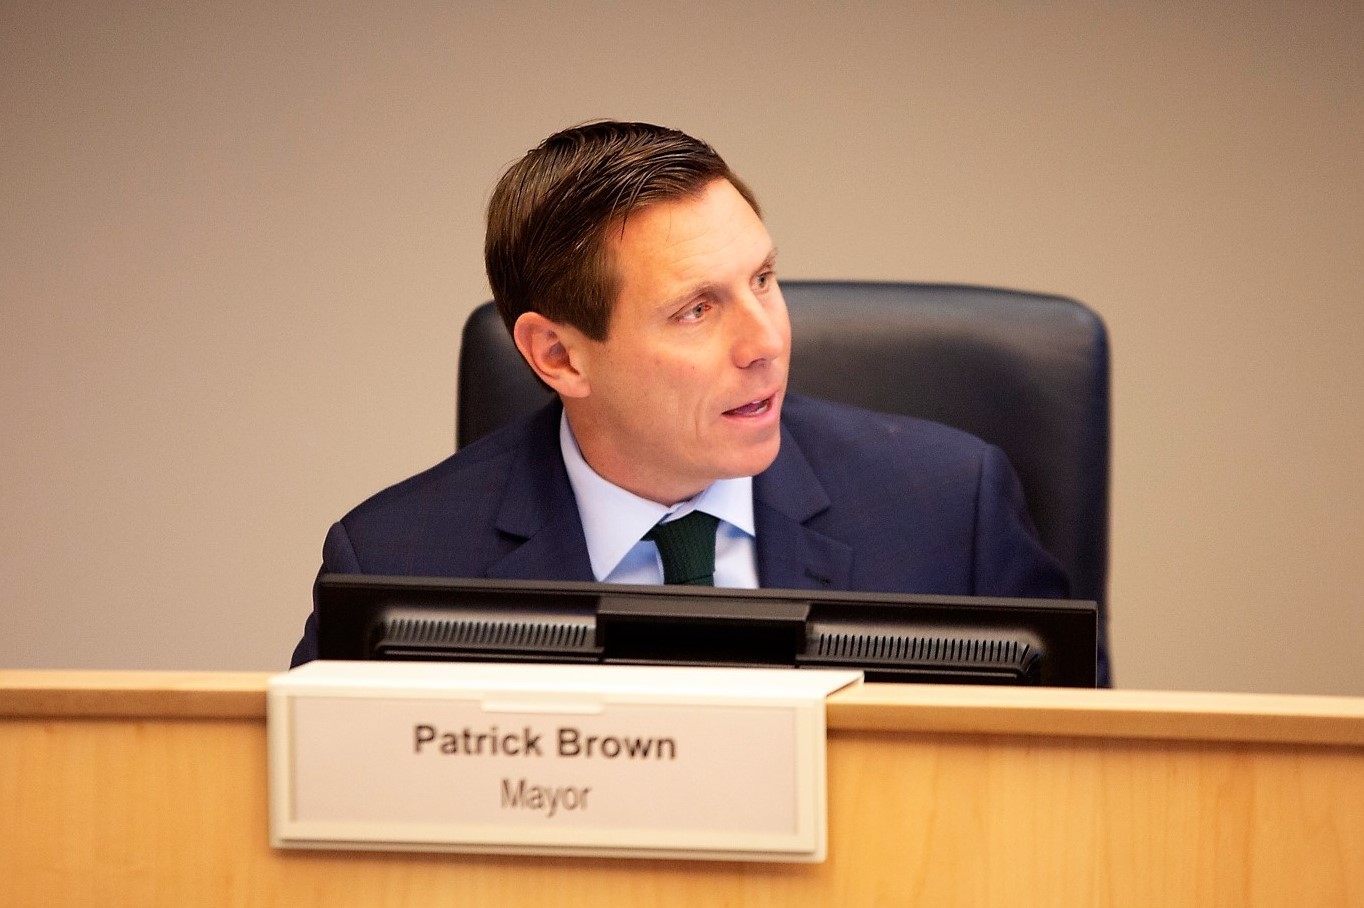 Integrity commissioner confirms Patrick Brown misled council about investigation; emails reveal backroom dealing prior to bidding process; mayor cancels more meetings   